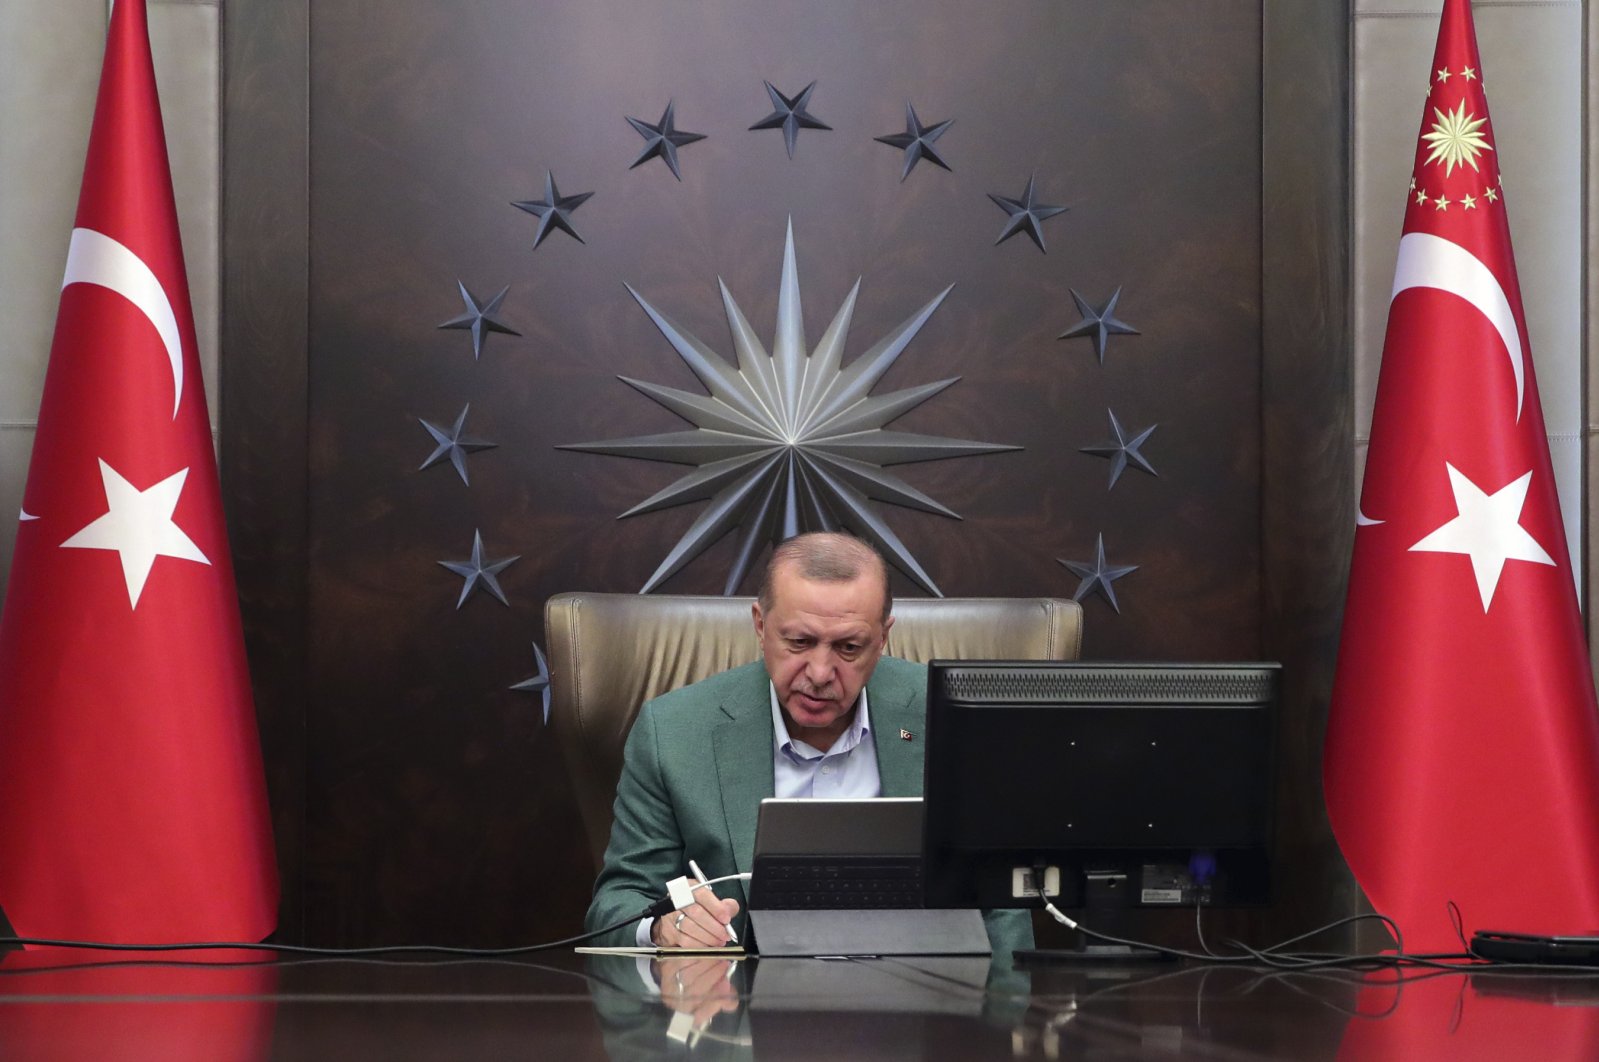 President Recep Tayyip Erdoğan participates in a teleconference with his ministers amid the coronavirus outbreak, in capital Ankara, Monday, March 23, 2020. (AP Photo)